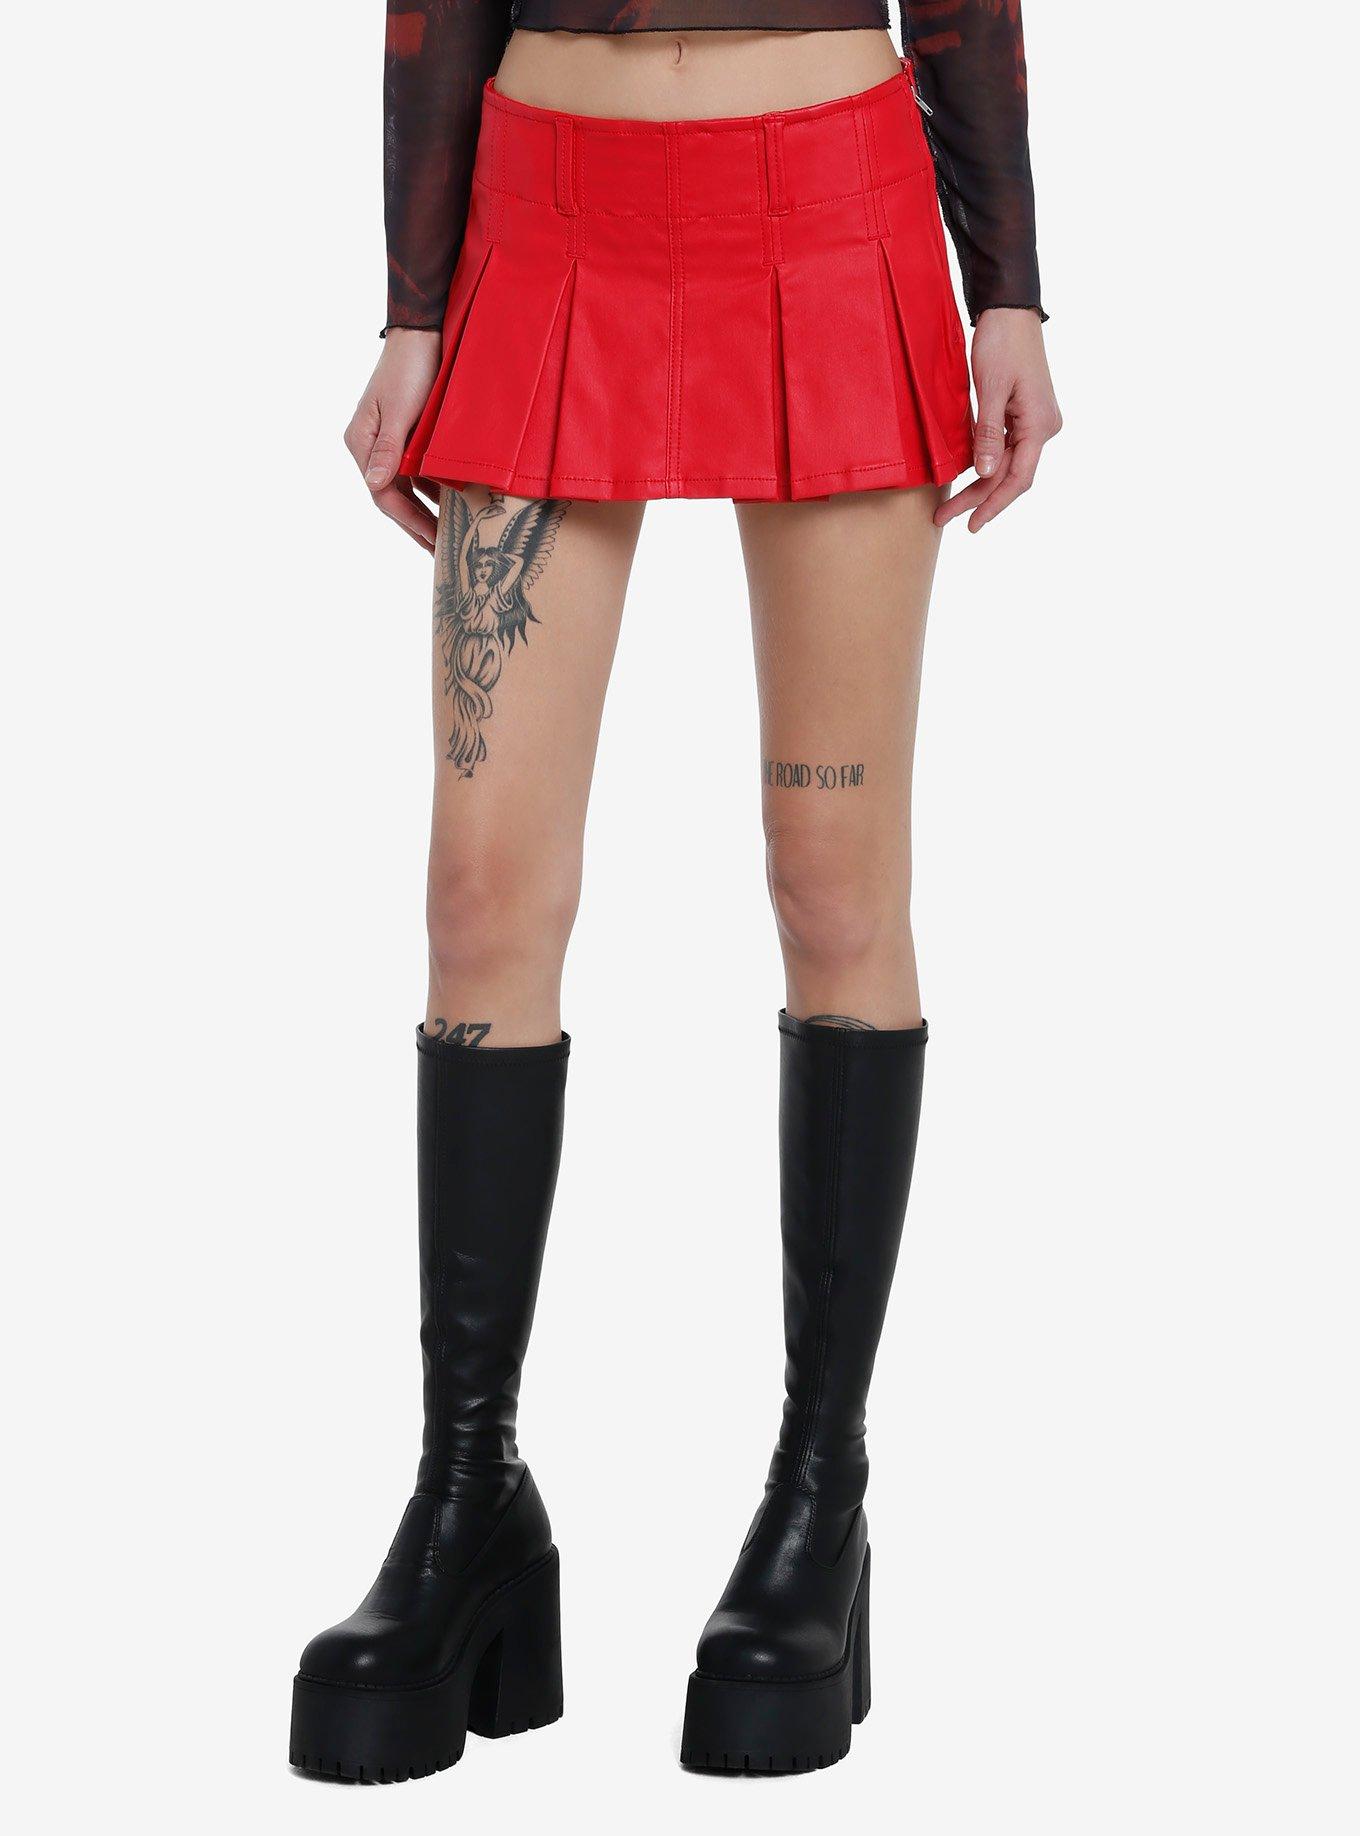 Social Collision Red Coated Mini Skort | Hot Topic